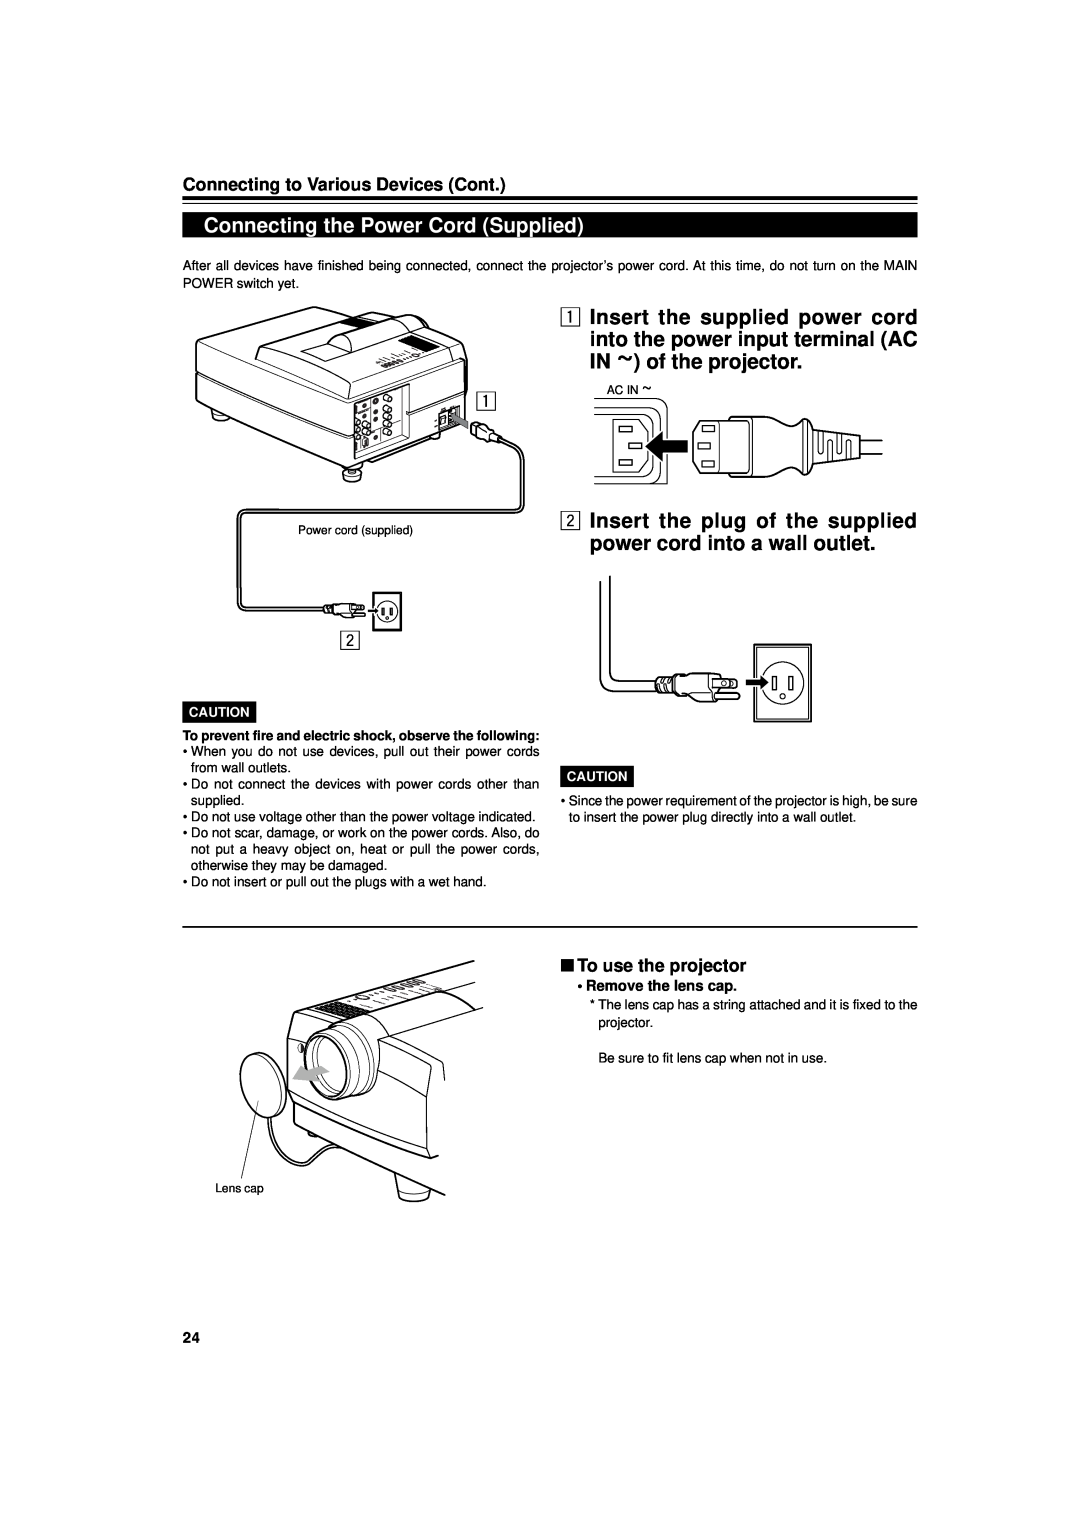 JVC DLA-G15U manual Connecting the Power Cord Supplied, Insert the supplied power cord, Connecting to Various Devices Cont 